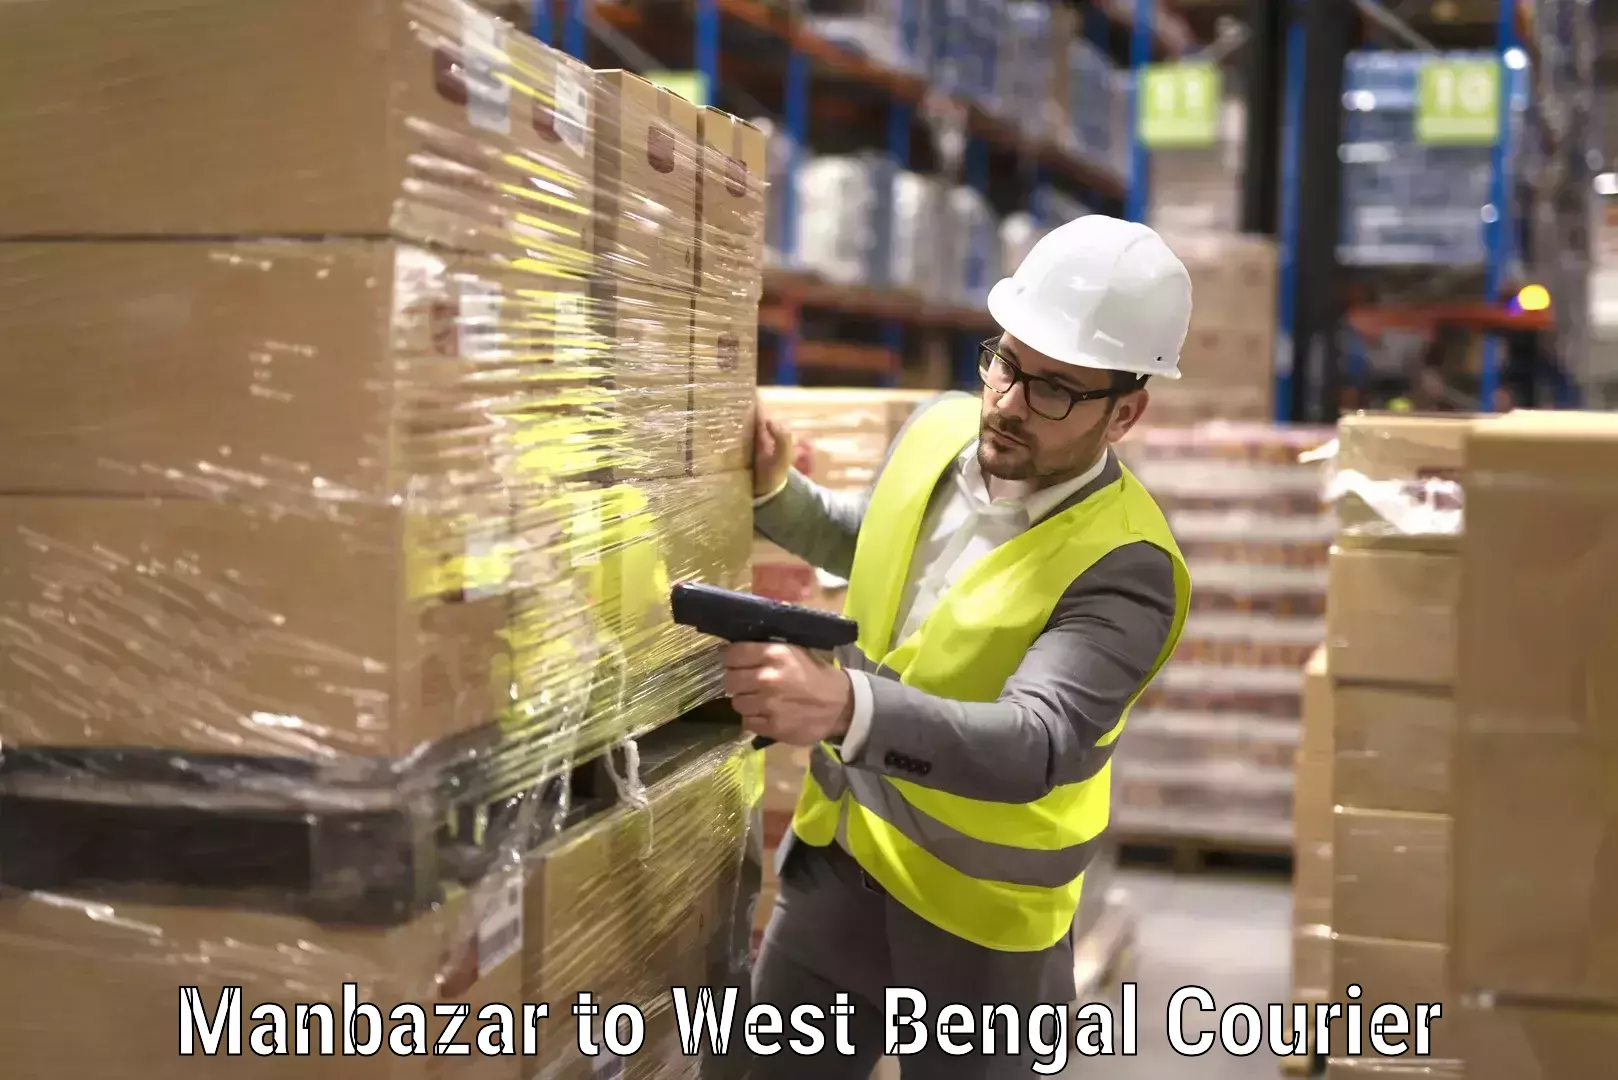 Furniture delivery service Manbazar to West Bengal